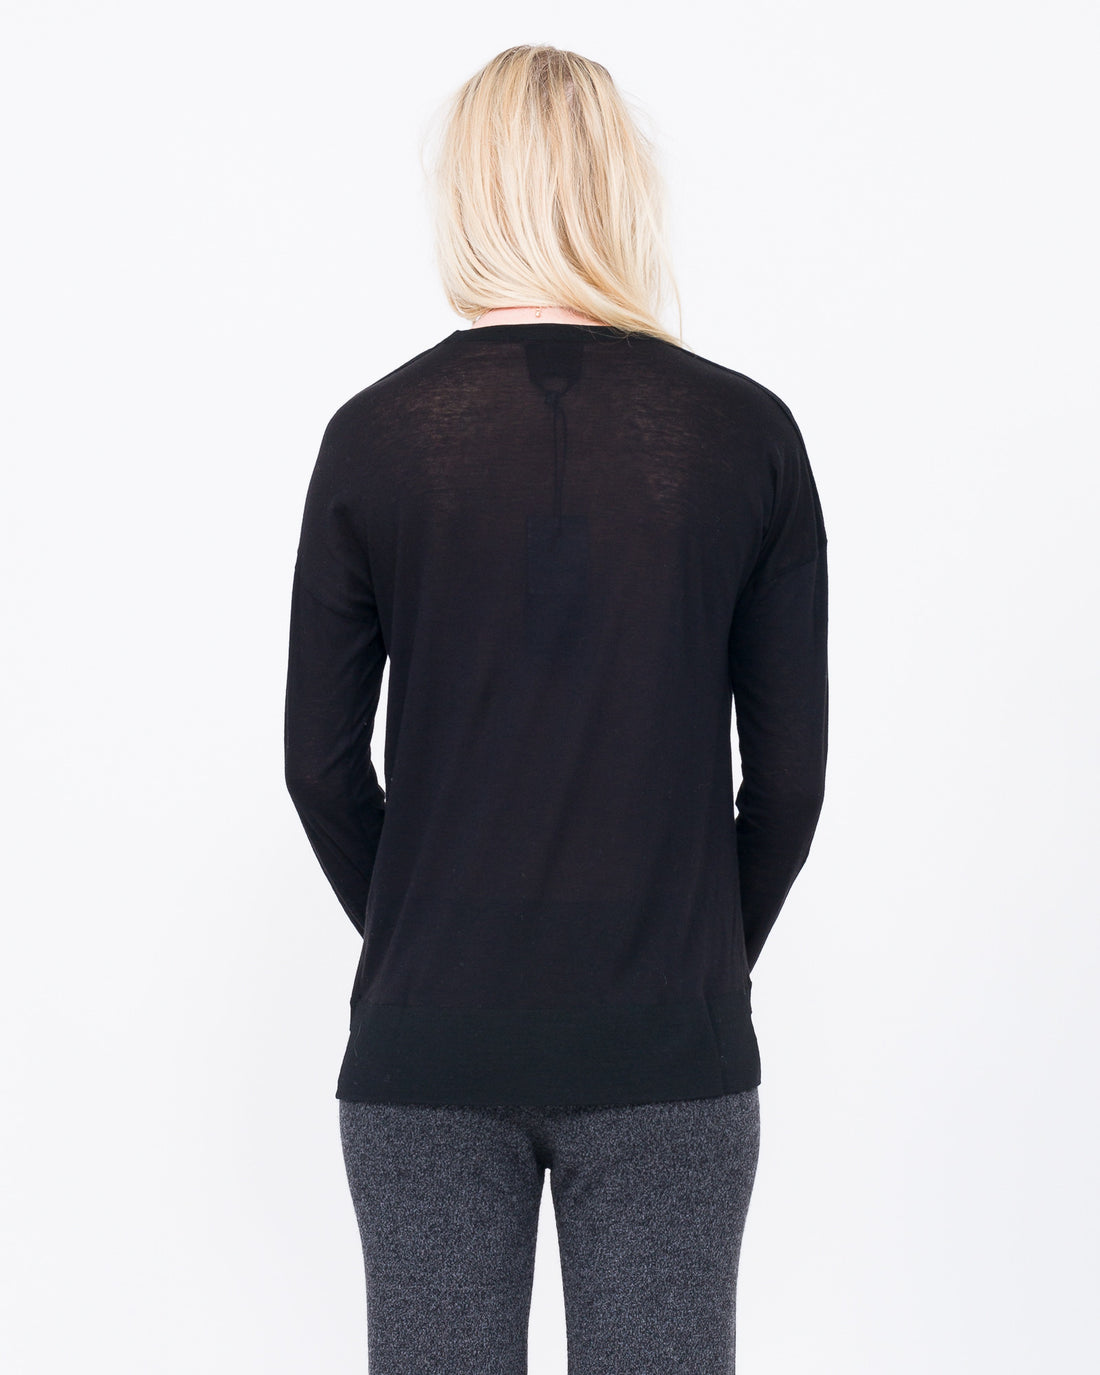 Alma whisper weight Cashmere top